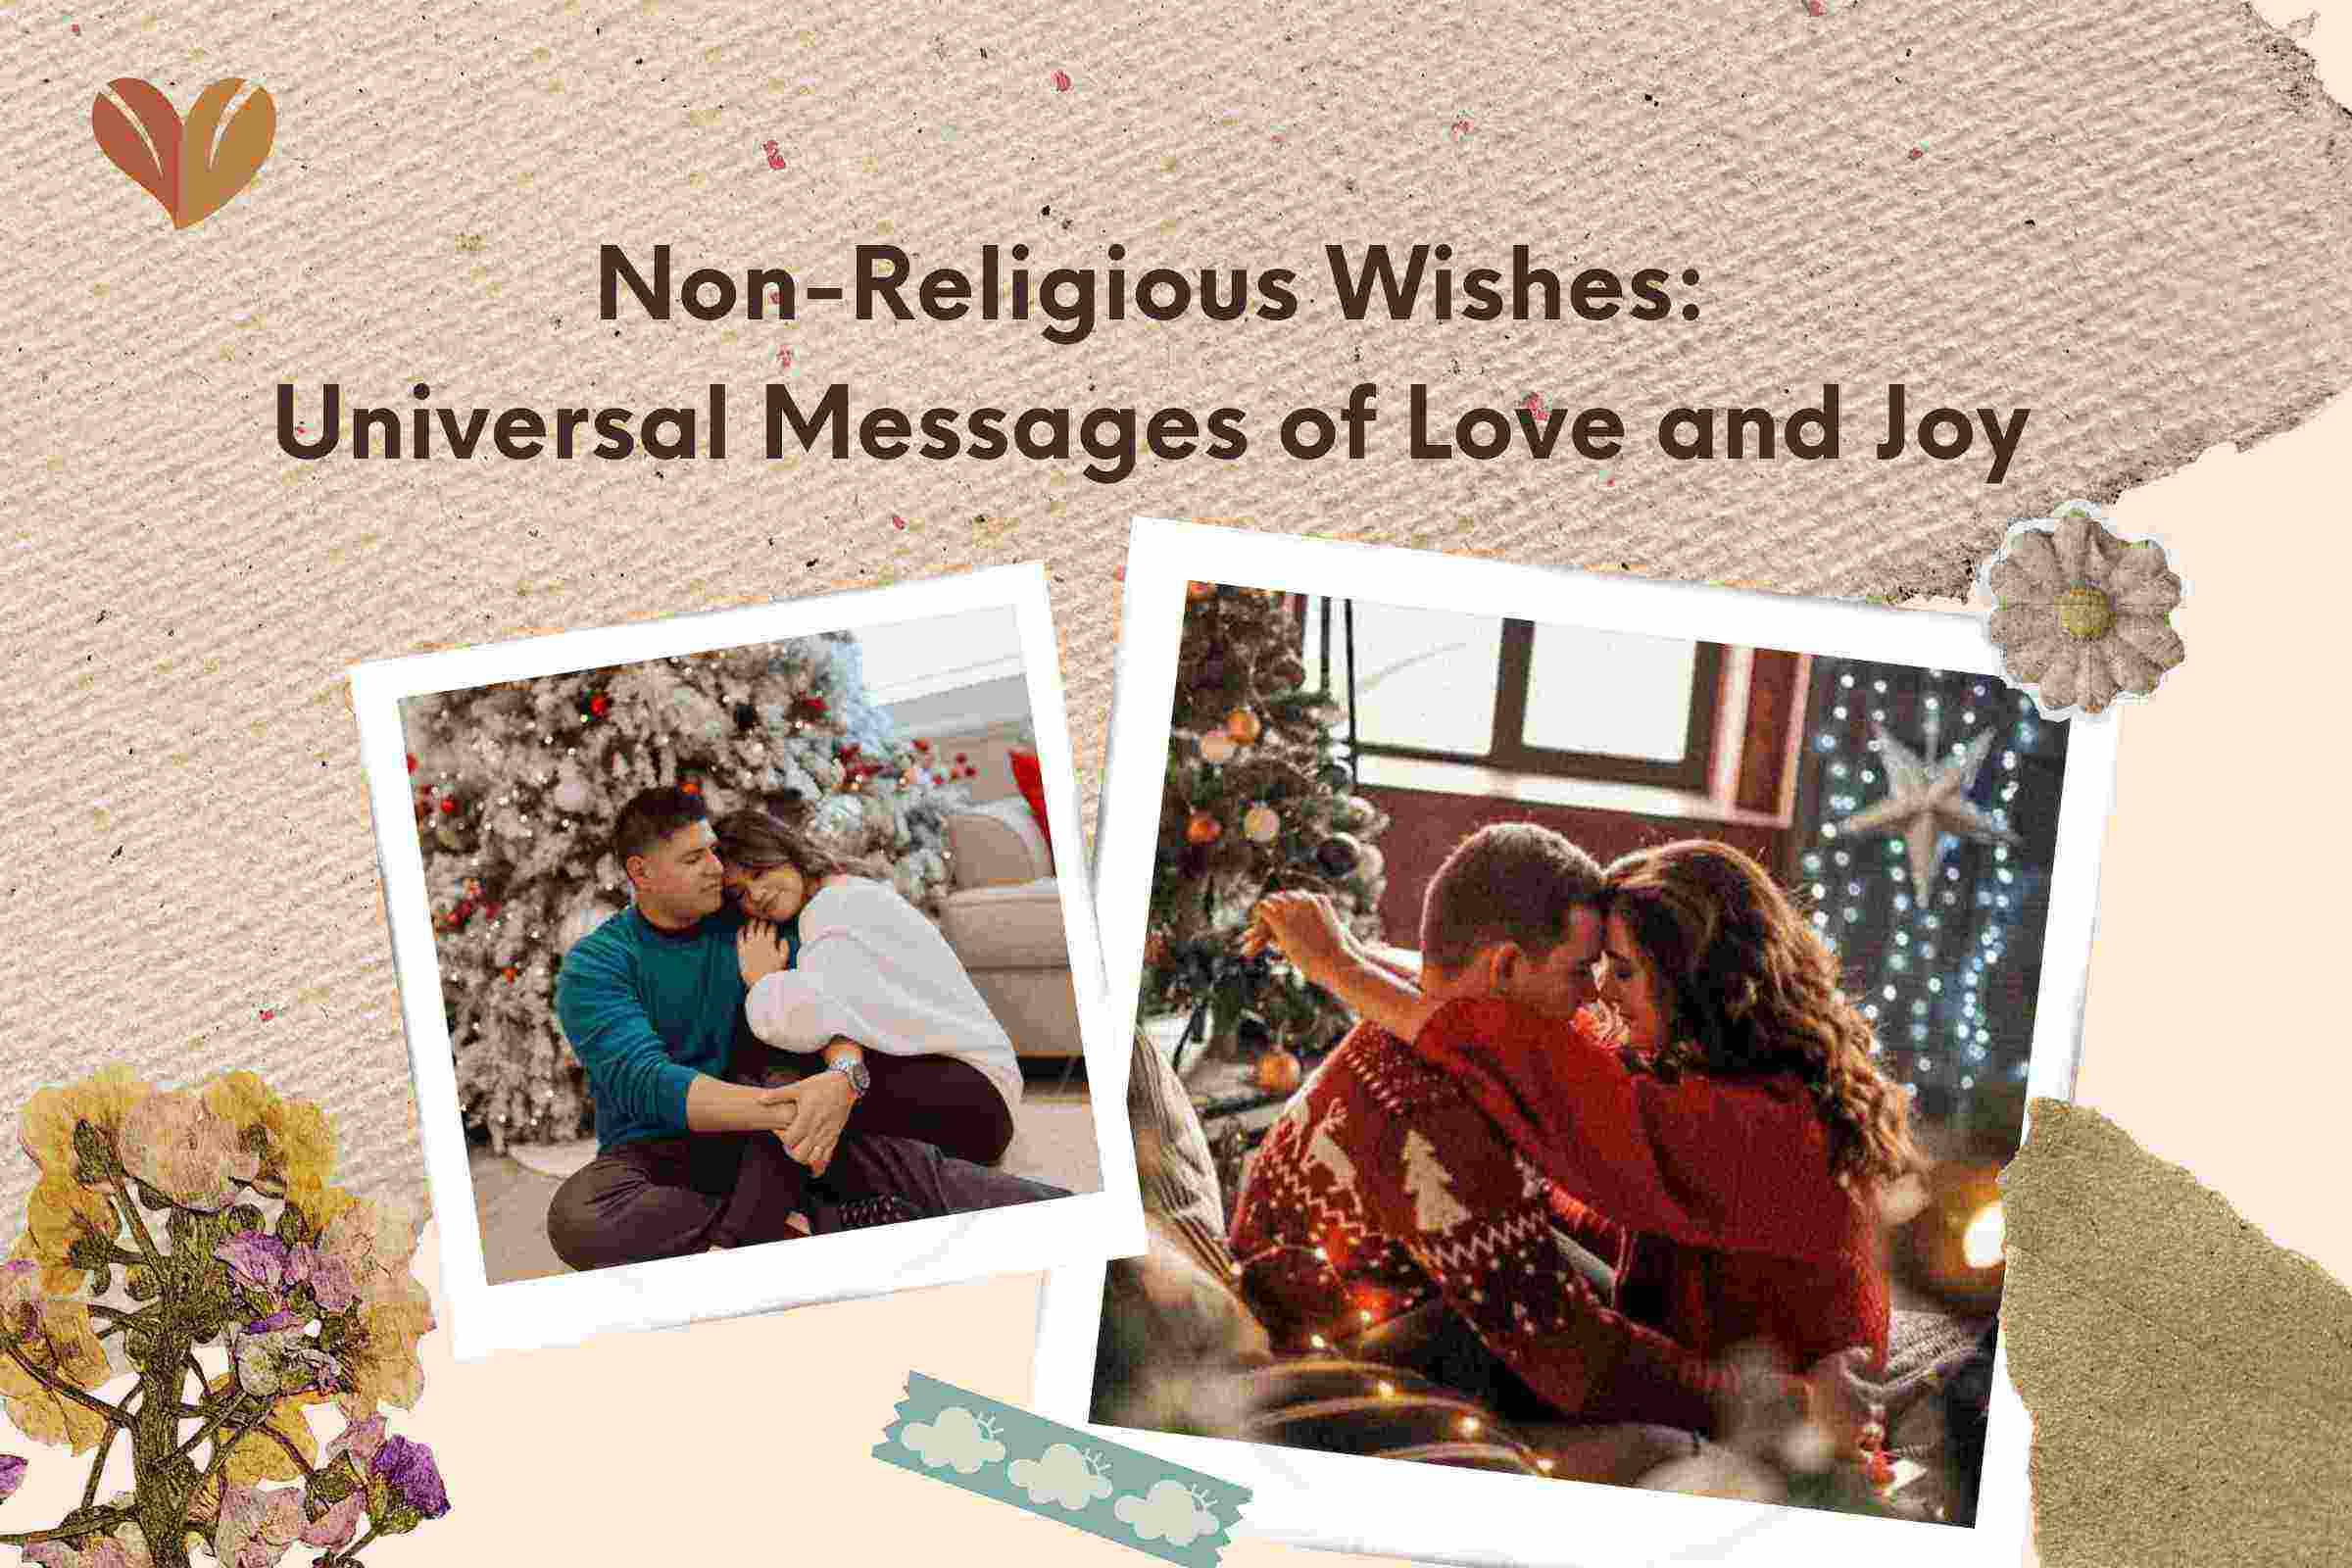 Non-Religious Wishes: Universal Messages of Love and Joy